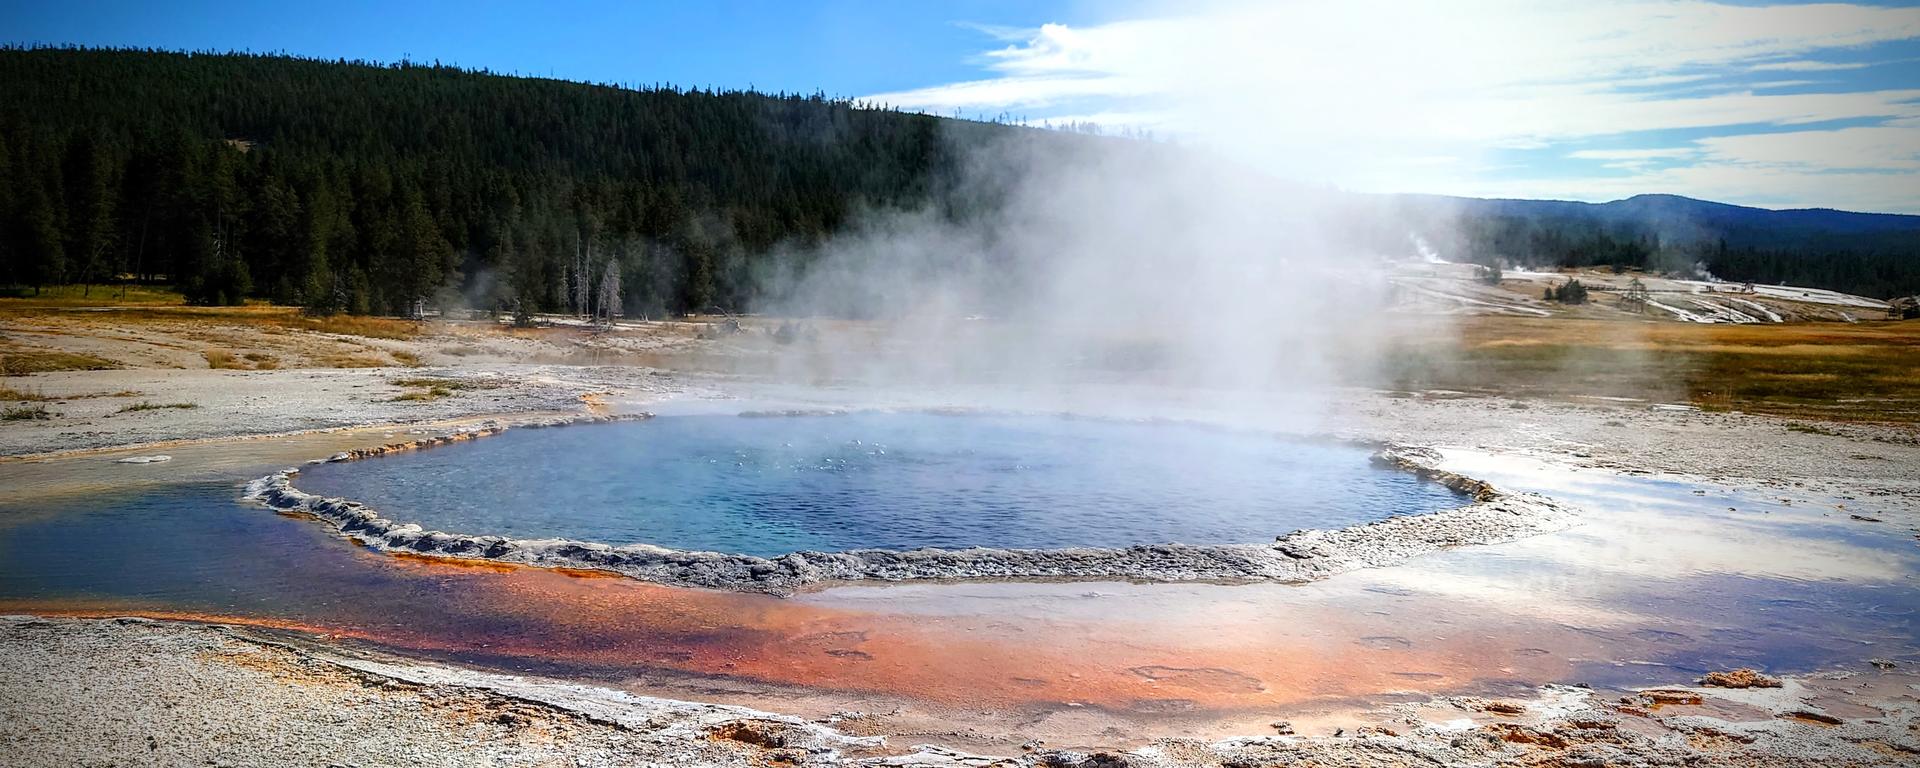 Bubbling Hotsprings in Yellowstone National Park